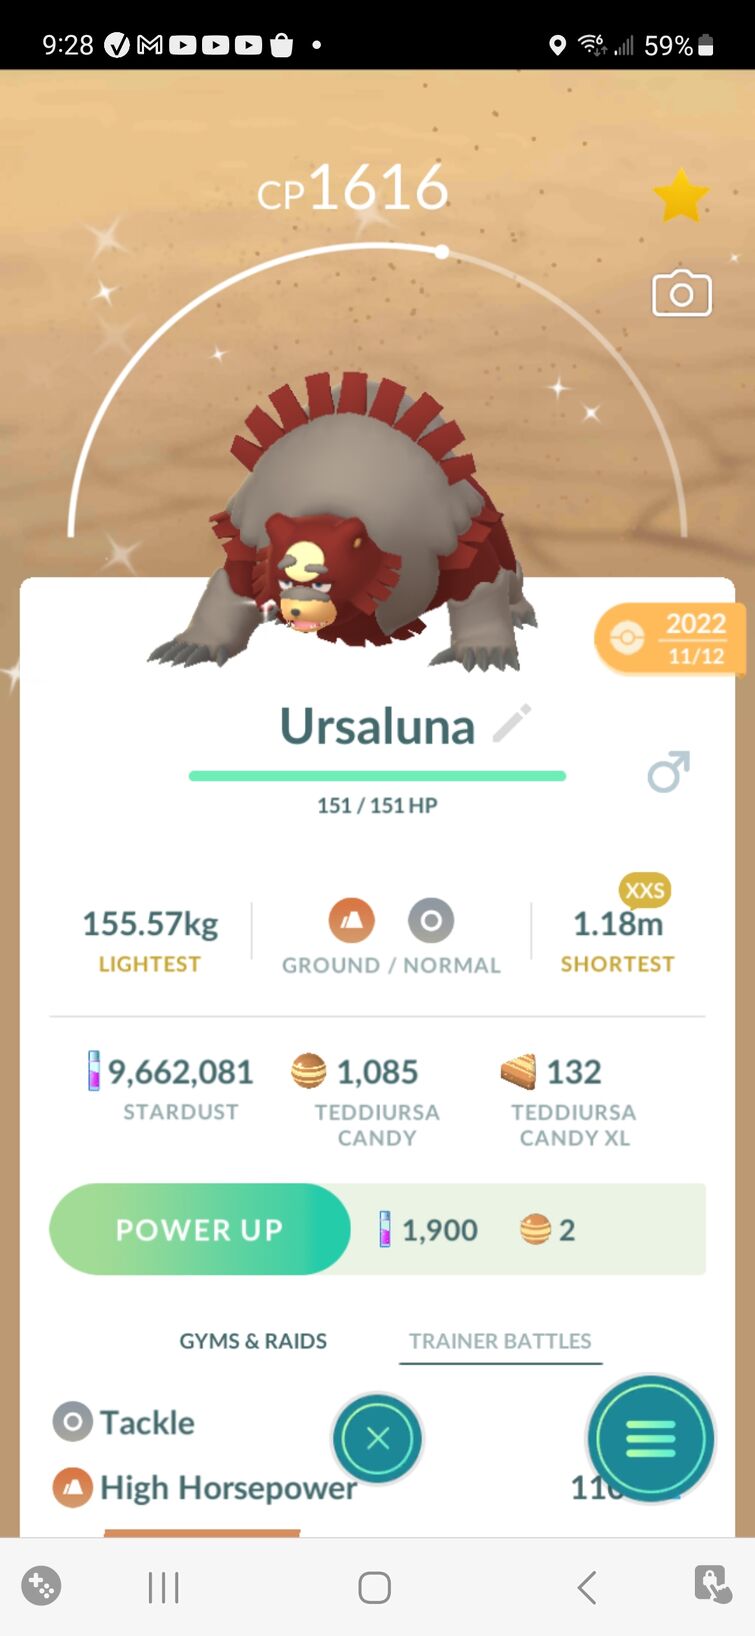 What are the odds of getting a shiny in Pokemon go event?